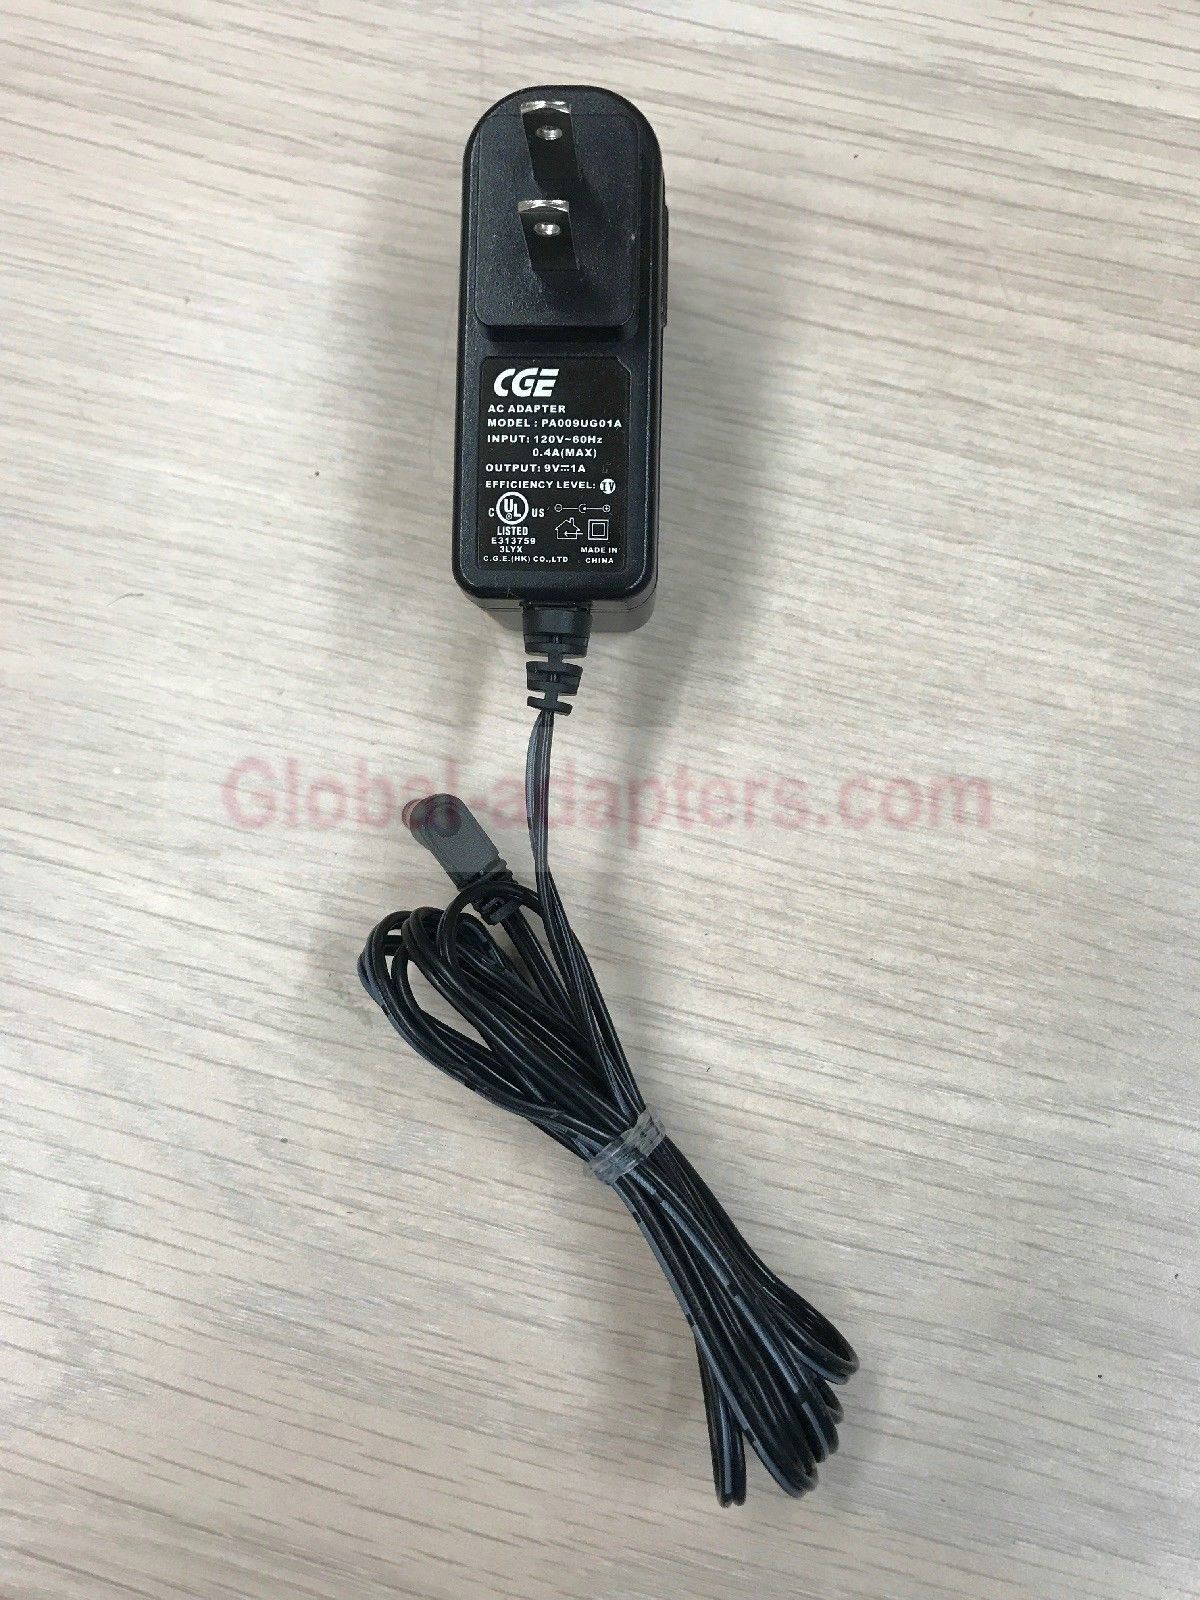 NEW 9V 1A CGE PA009UG01A AC Adapter